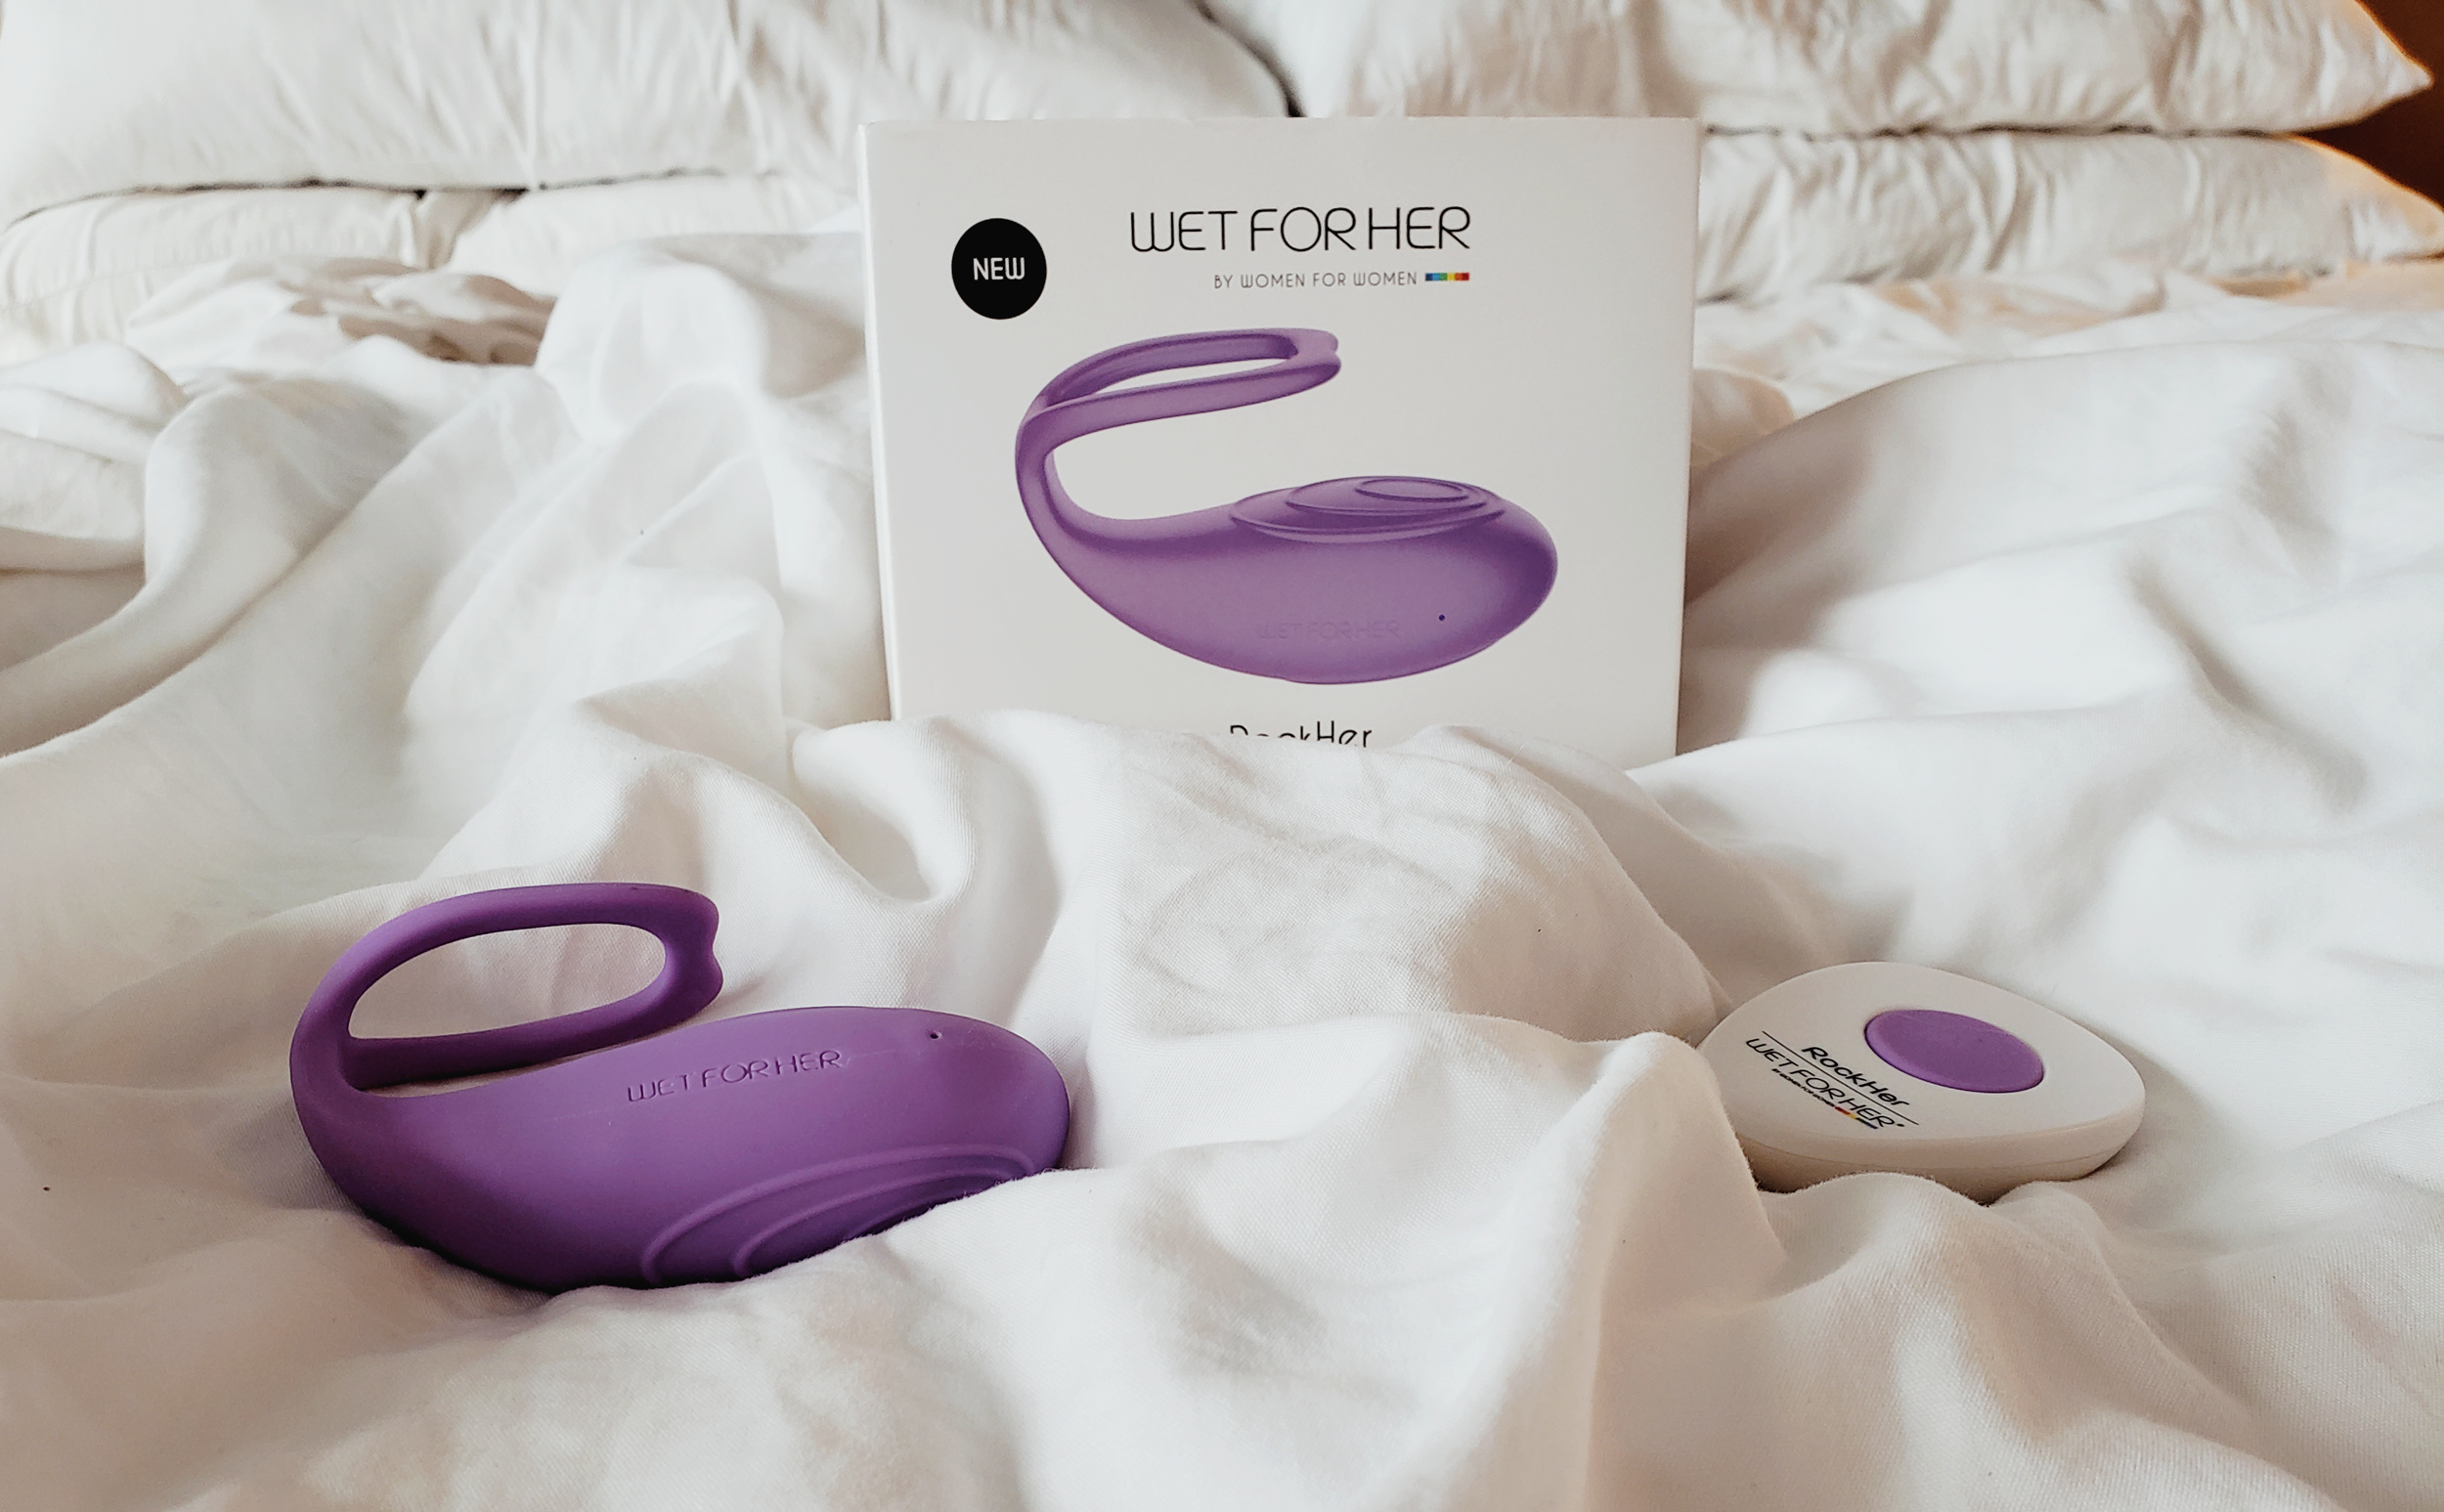 Lesbian Scissor Sex Toy - Review: RockHer Mini Scissoring Vibrator by Wet For Her - Betty Butch